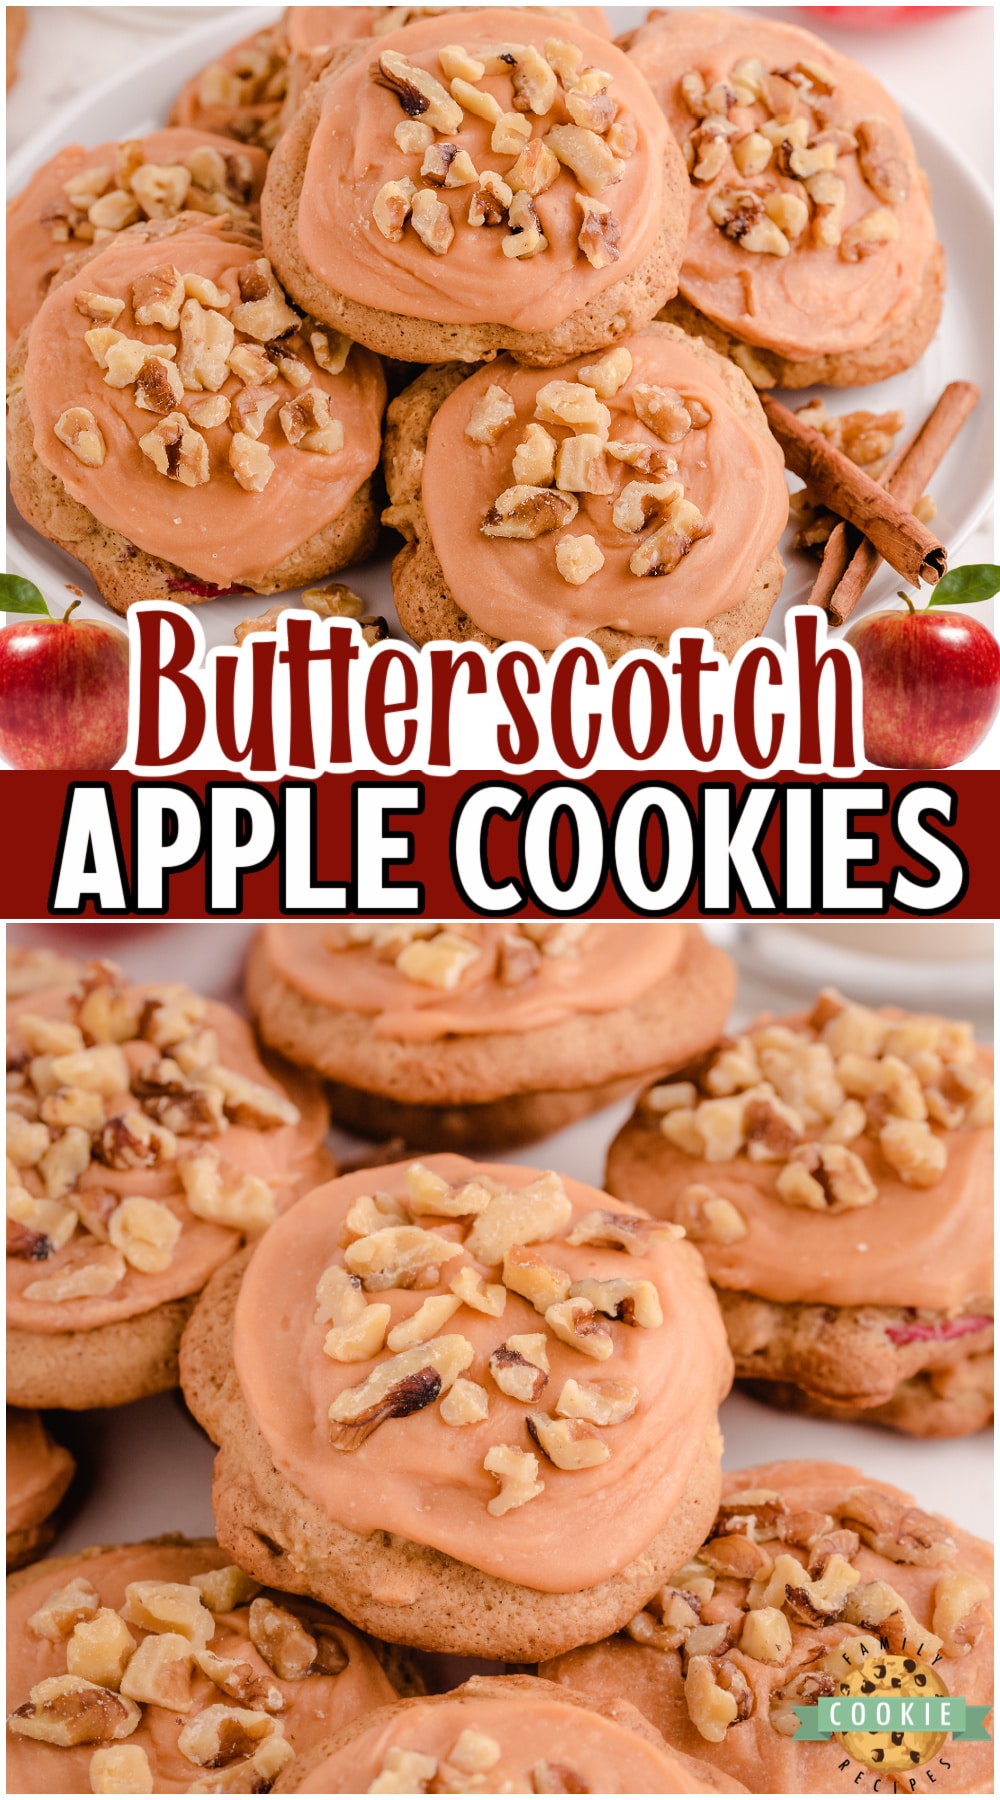 Butterscotch apple cookies are soft & chewy frosted cookies made with apples, brown sugar, butterscotch chips & cinnamon! Perfect apple cookie for anyone who craves Fall flavors. 